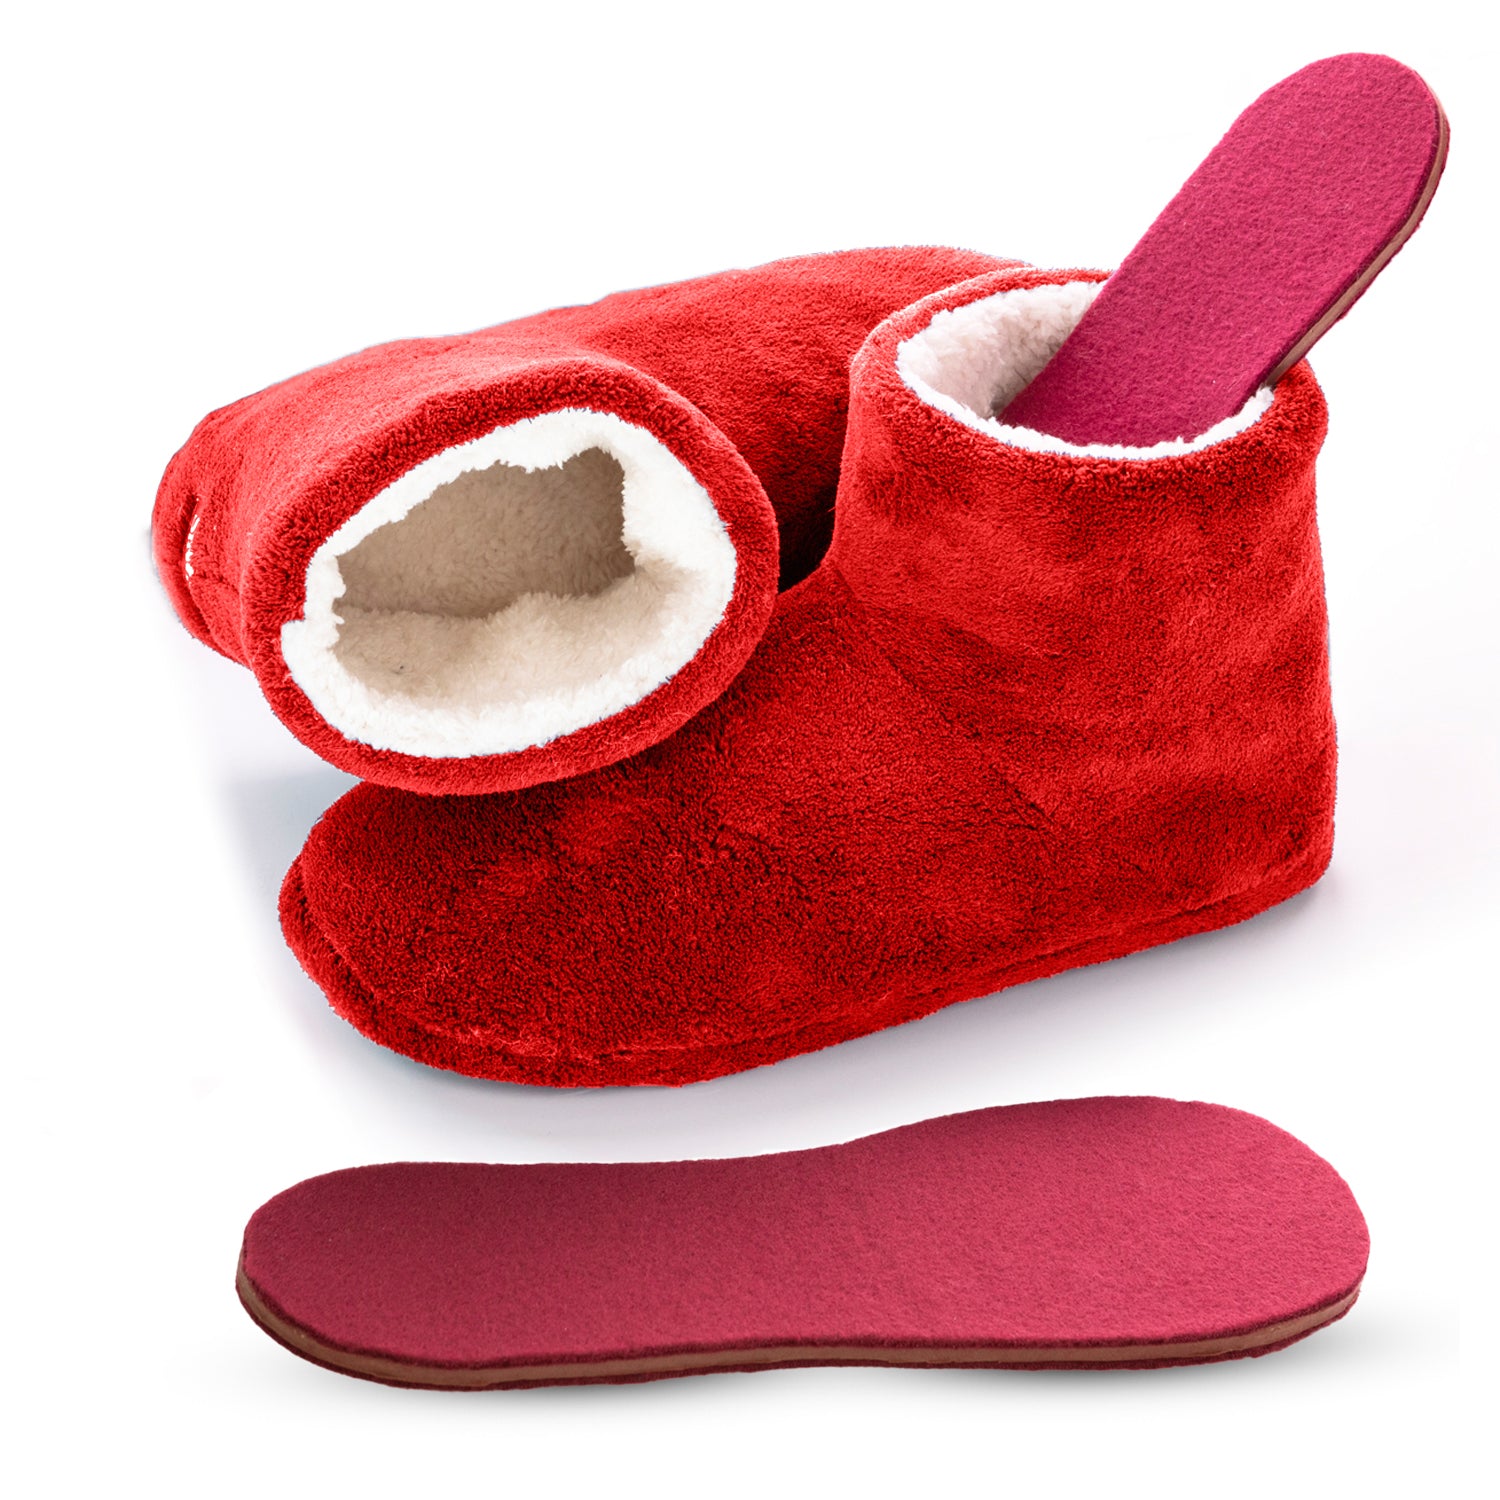 insoles for booties